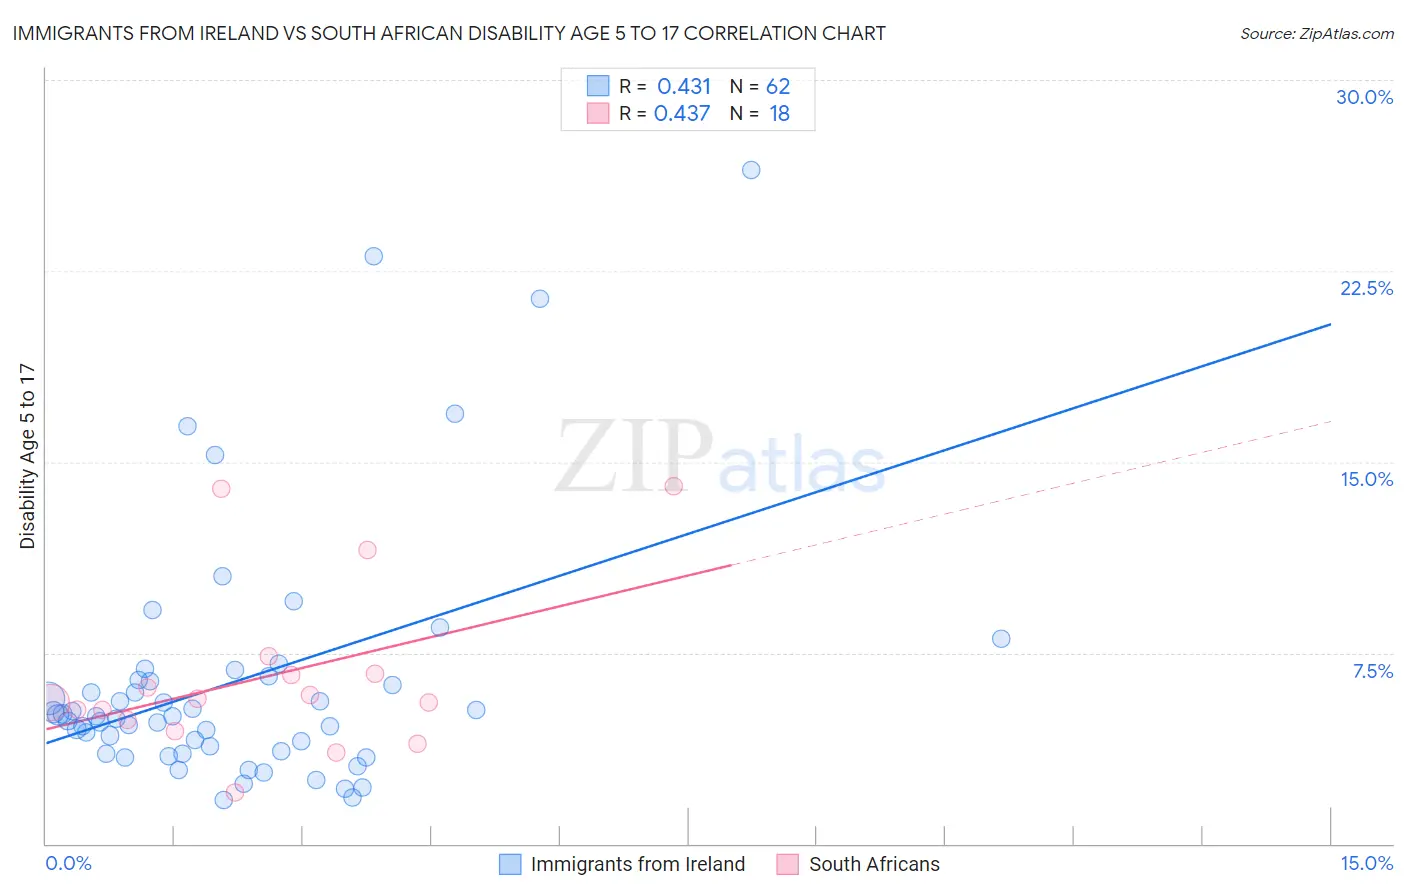 Immigrants from Ireland vs South African Disability Age 5 to 17